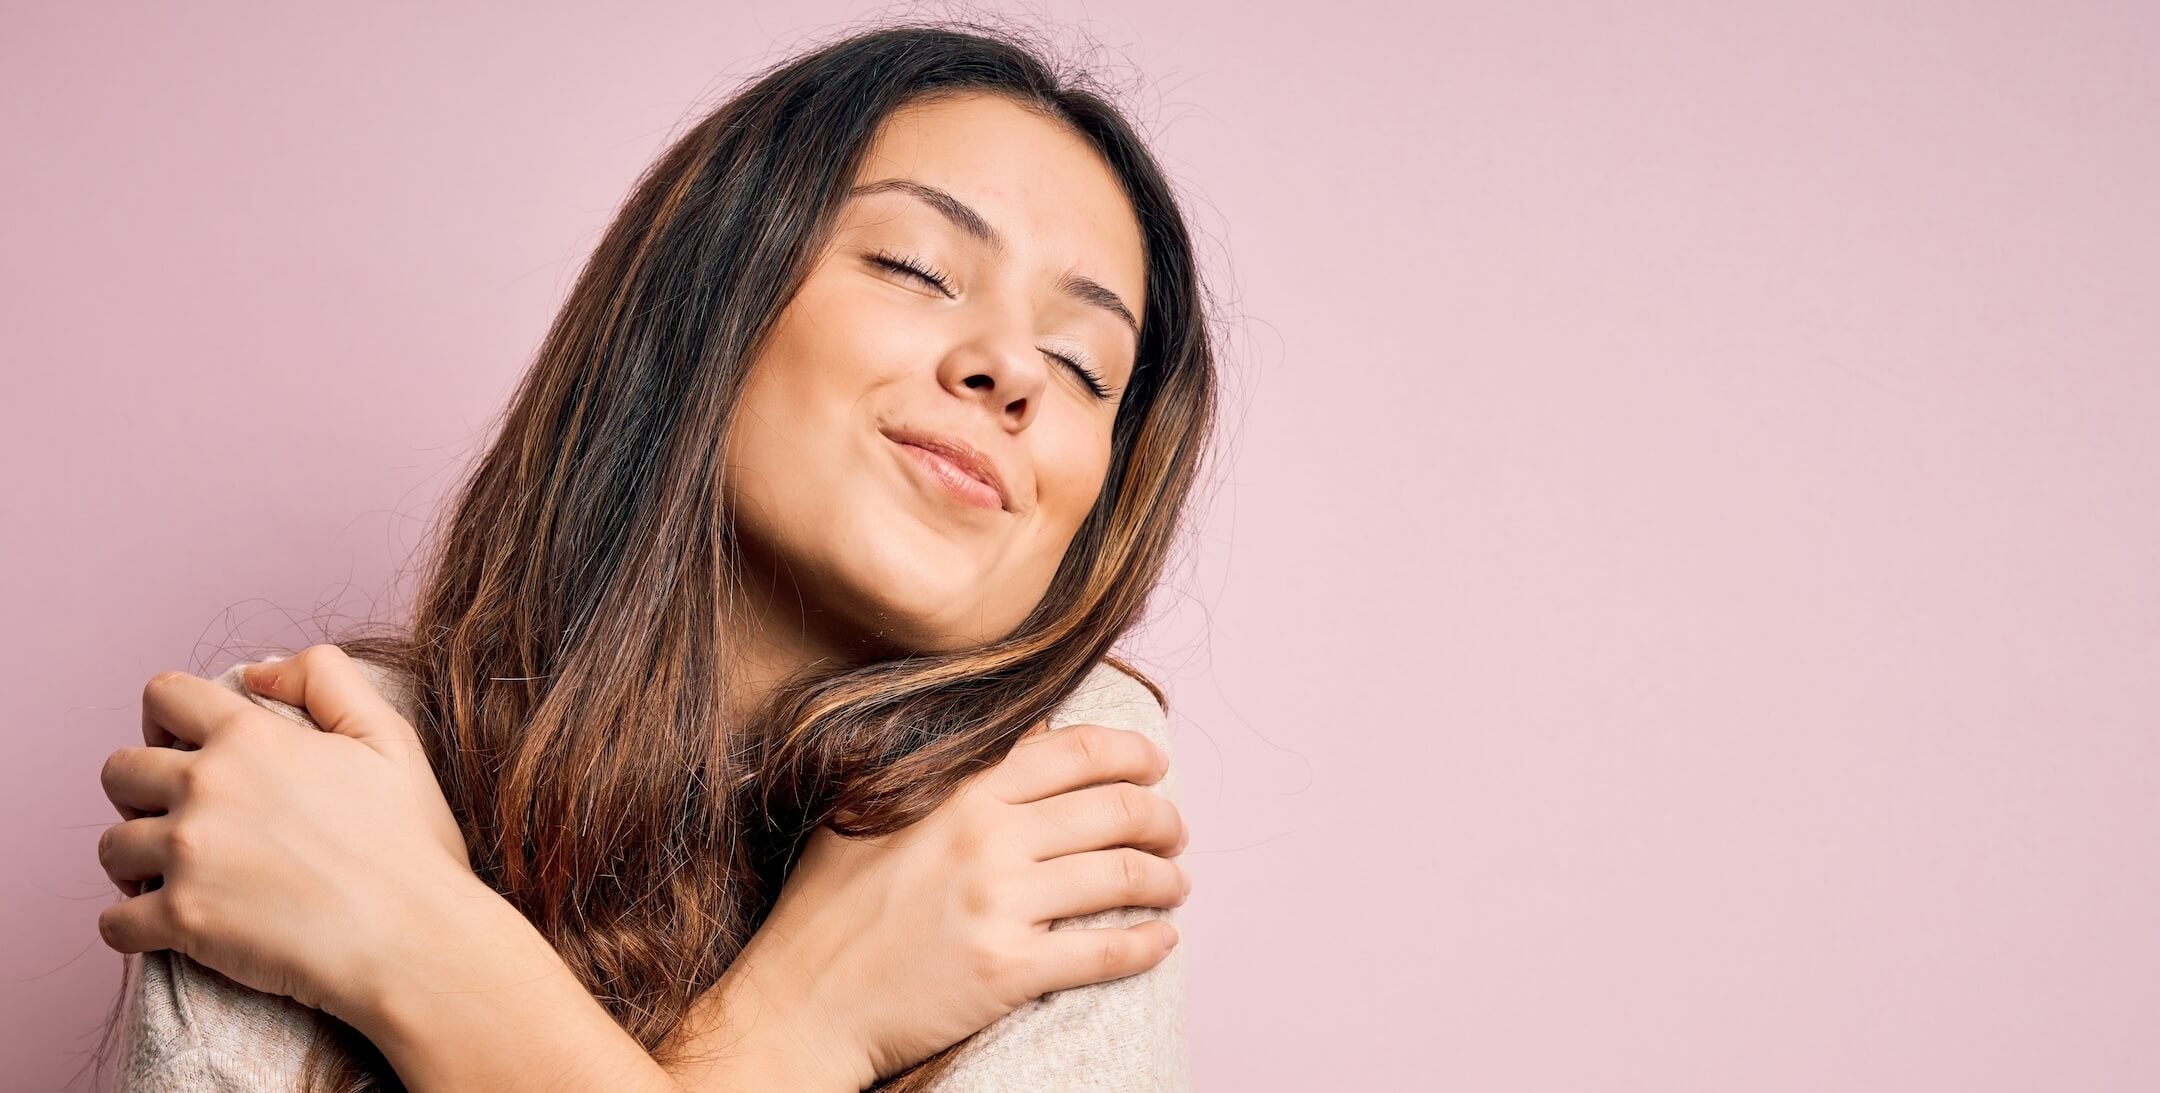 Woman hugging herself for self-love on a pink background